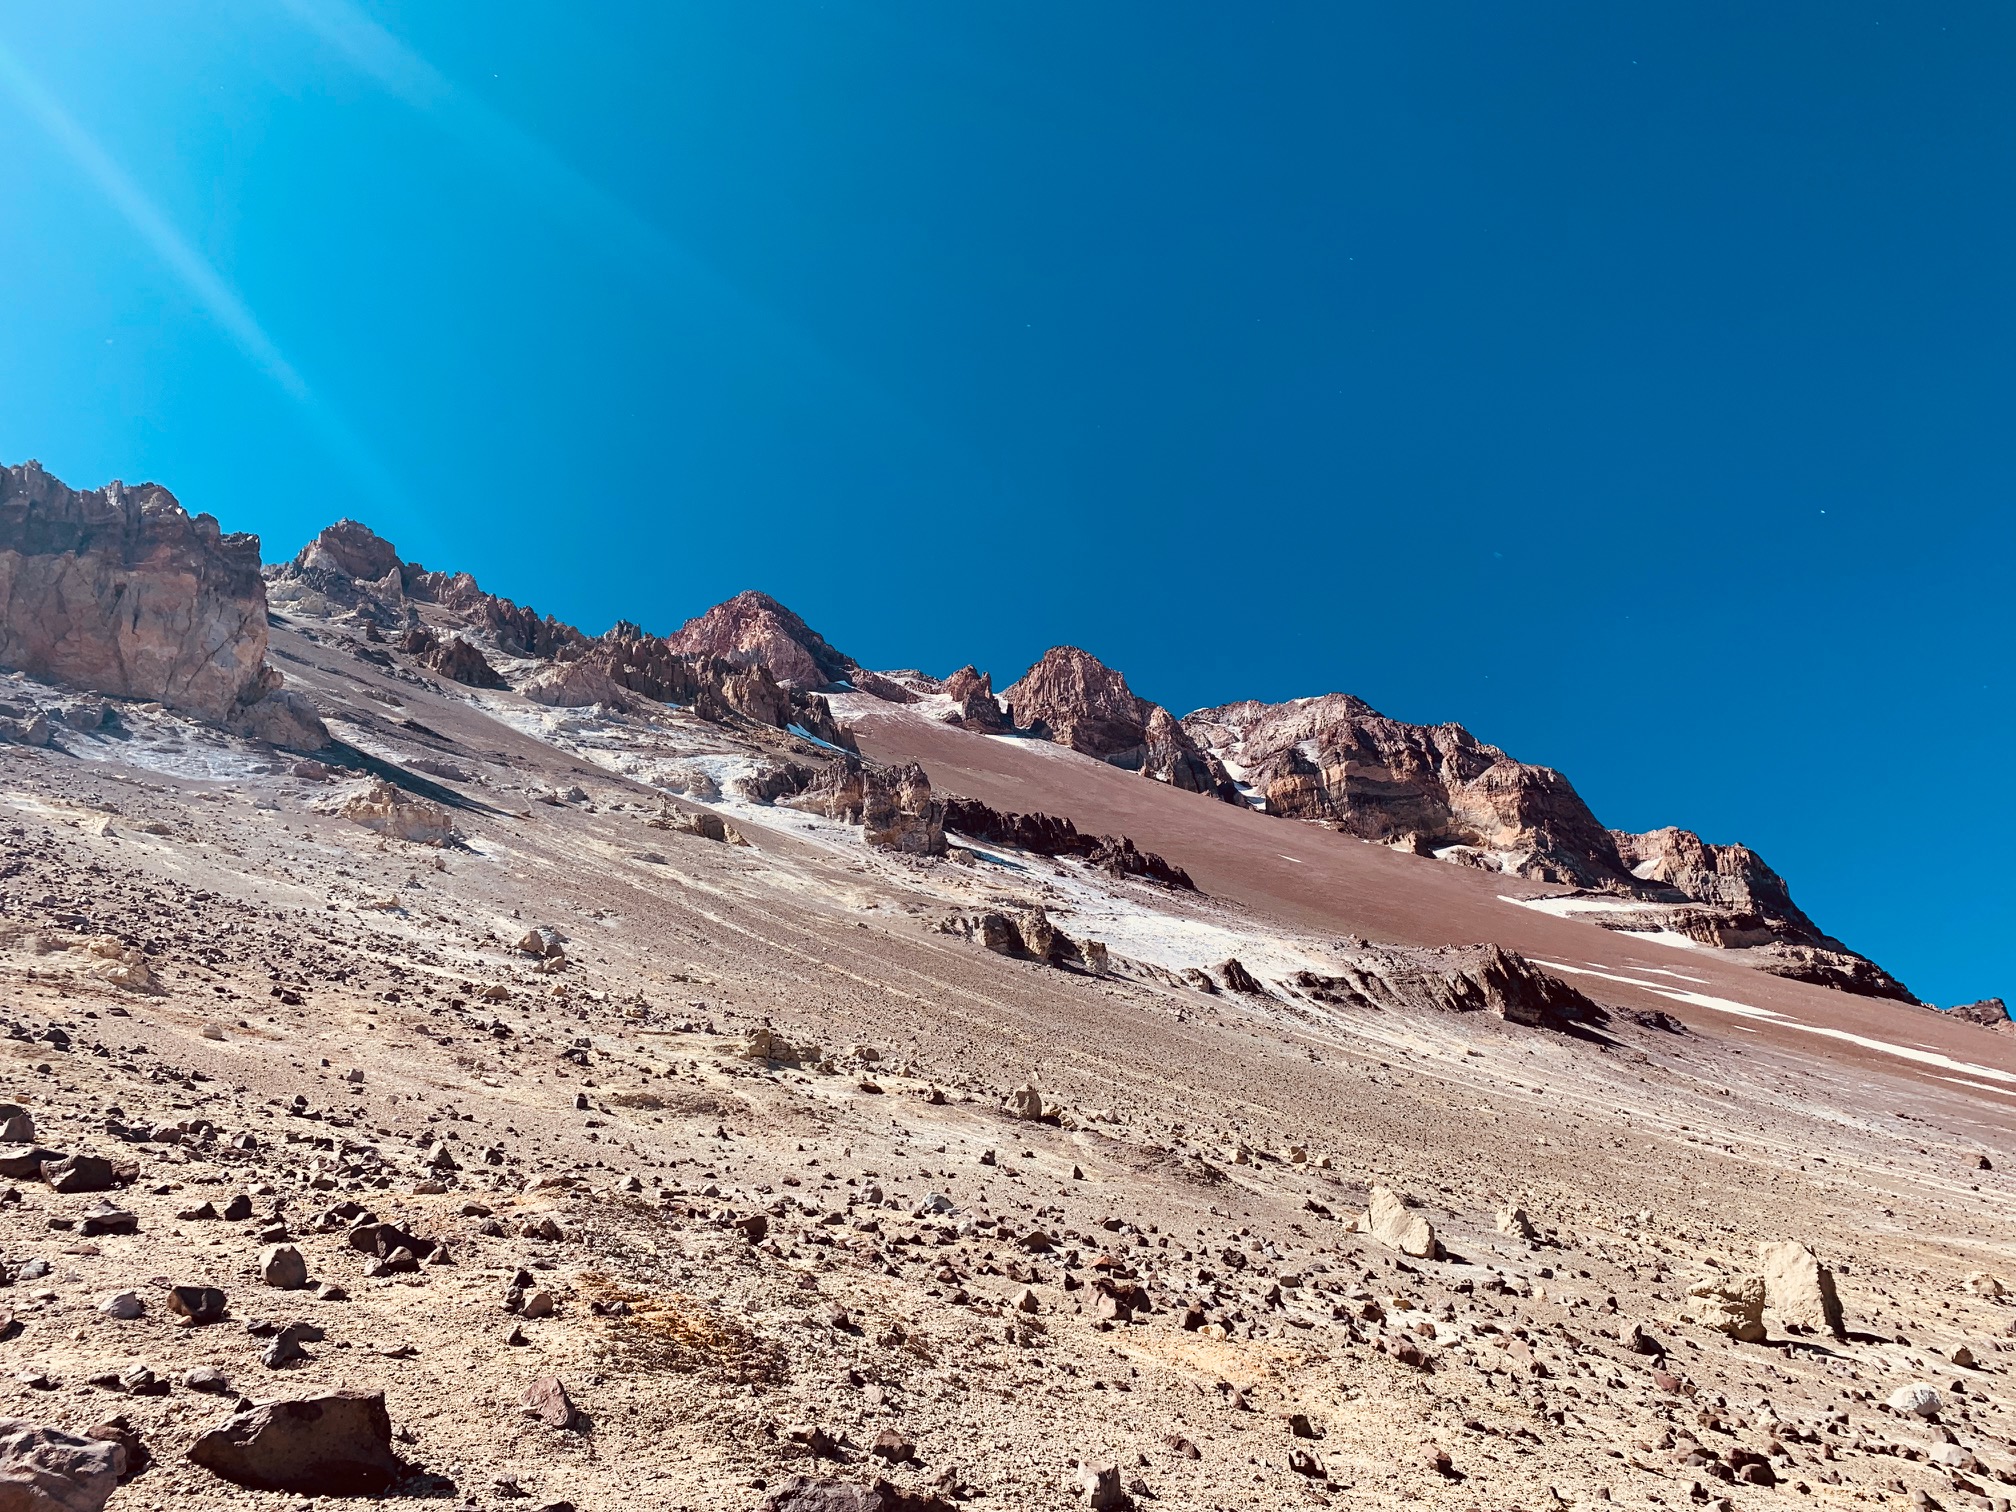 Looking up to the summit of Aconcagua